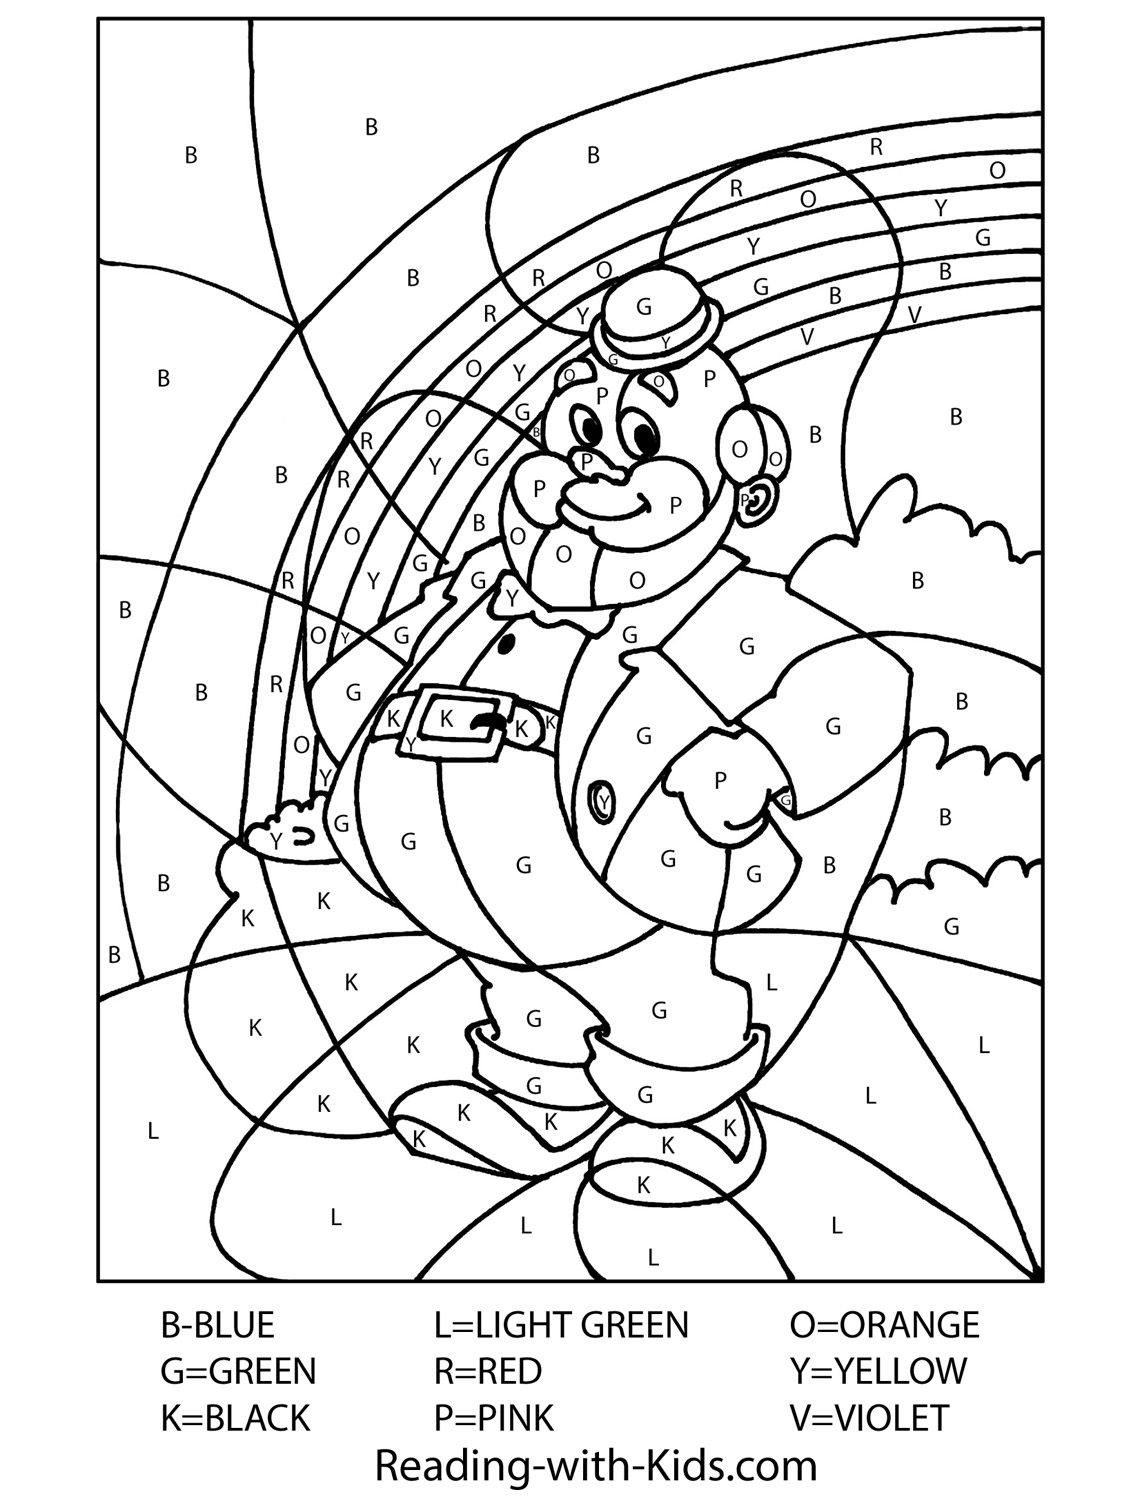 St Patrick'S Day Coloring Pages For Kids
 60 St Patrick s Day Activities and Coloring Pages